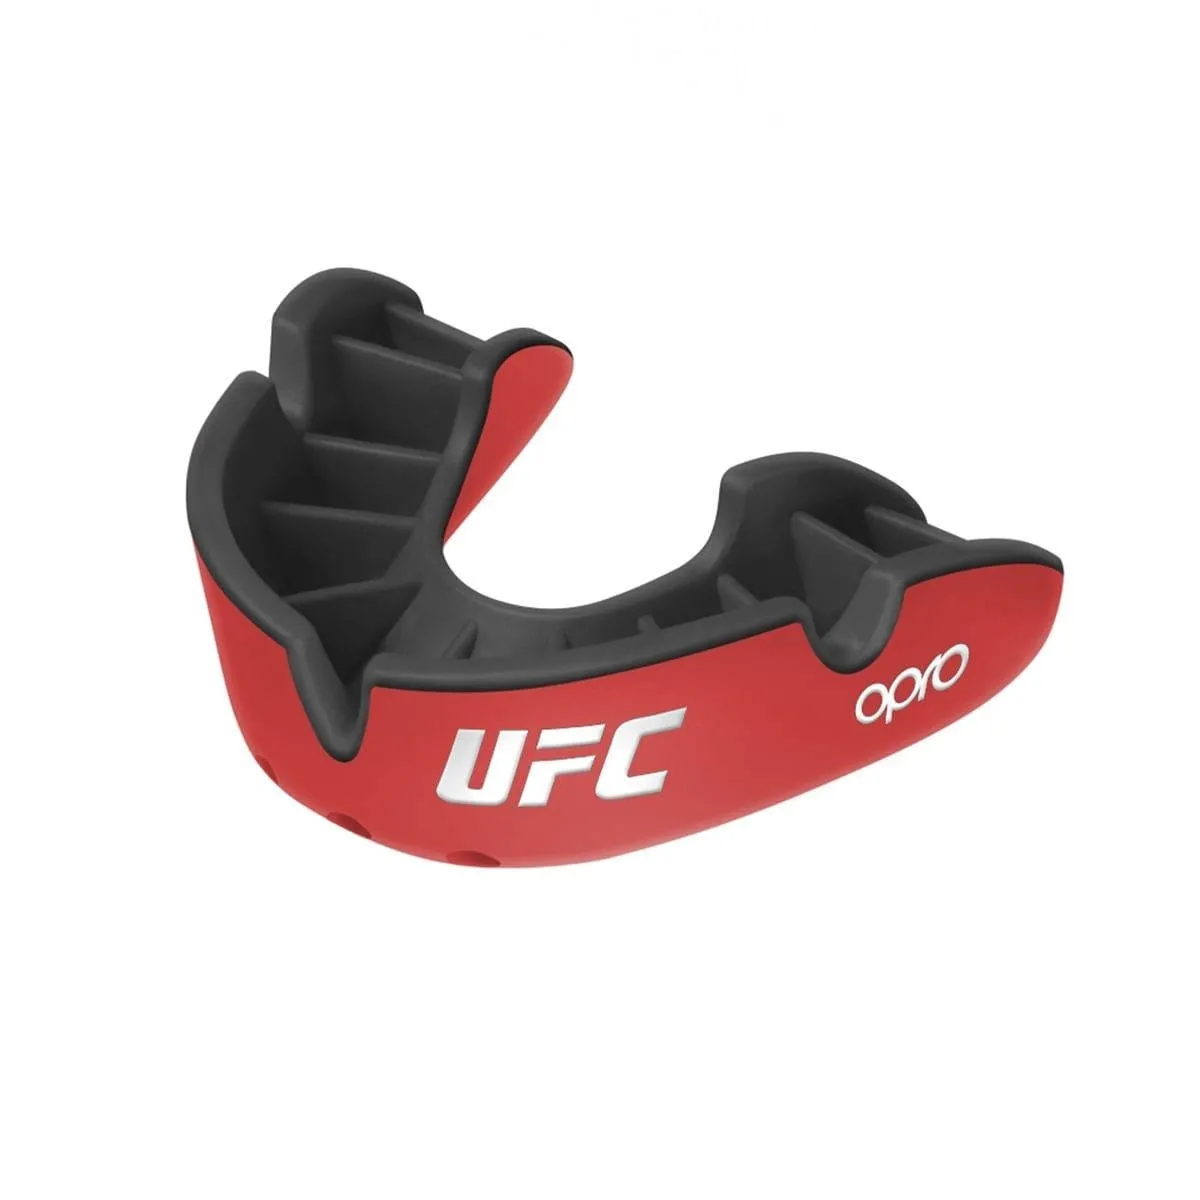 OPRO adidas mouthguard silver red/black